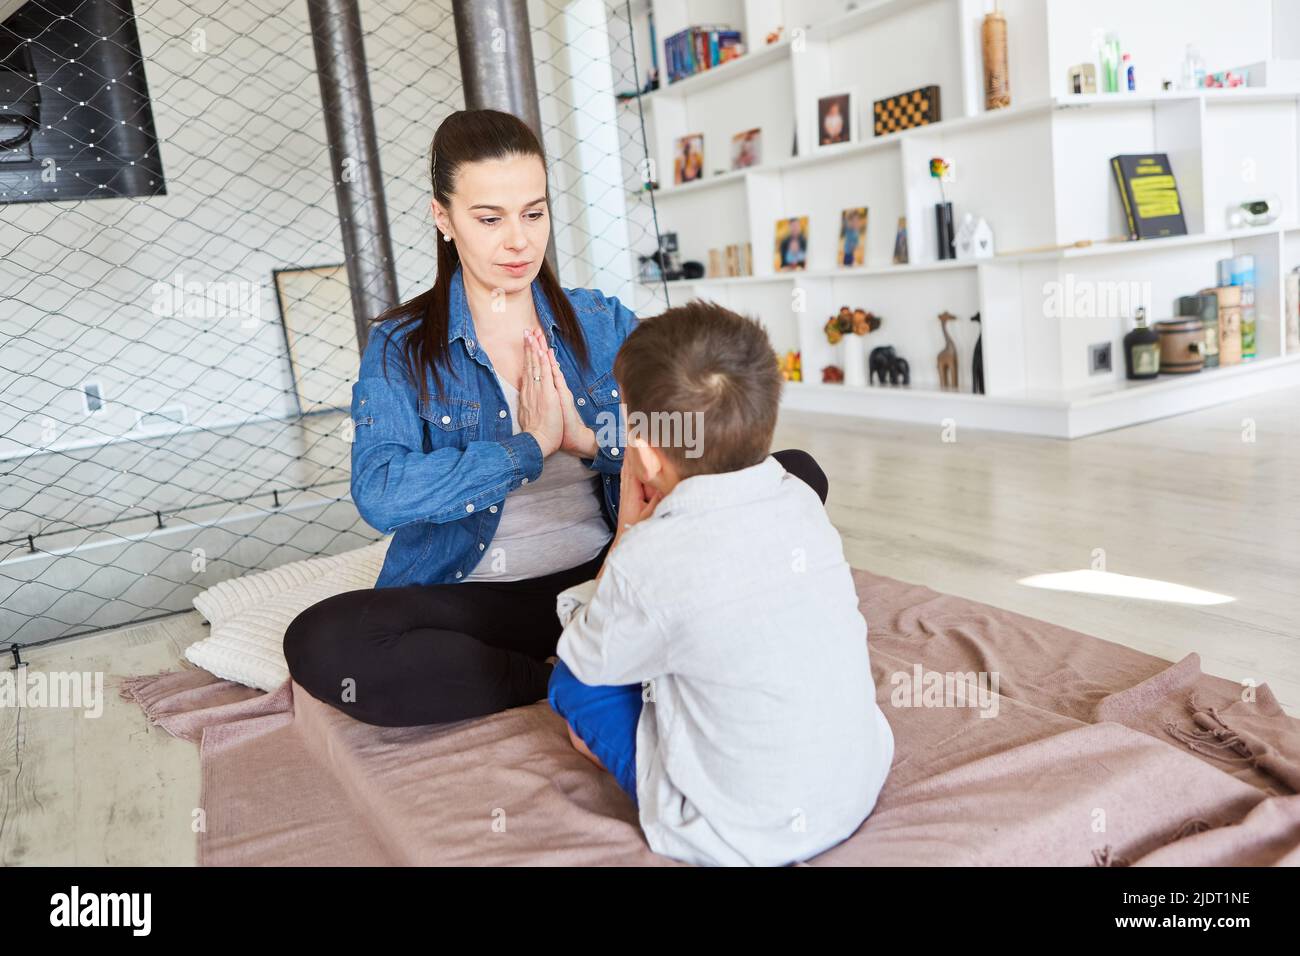 Mother sits across from her son doing a yoga exercise at home in the living room Stock Photo